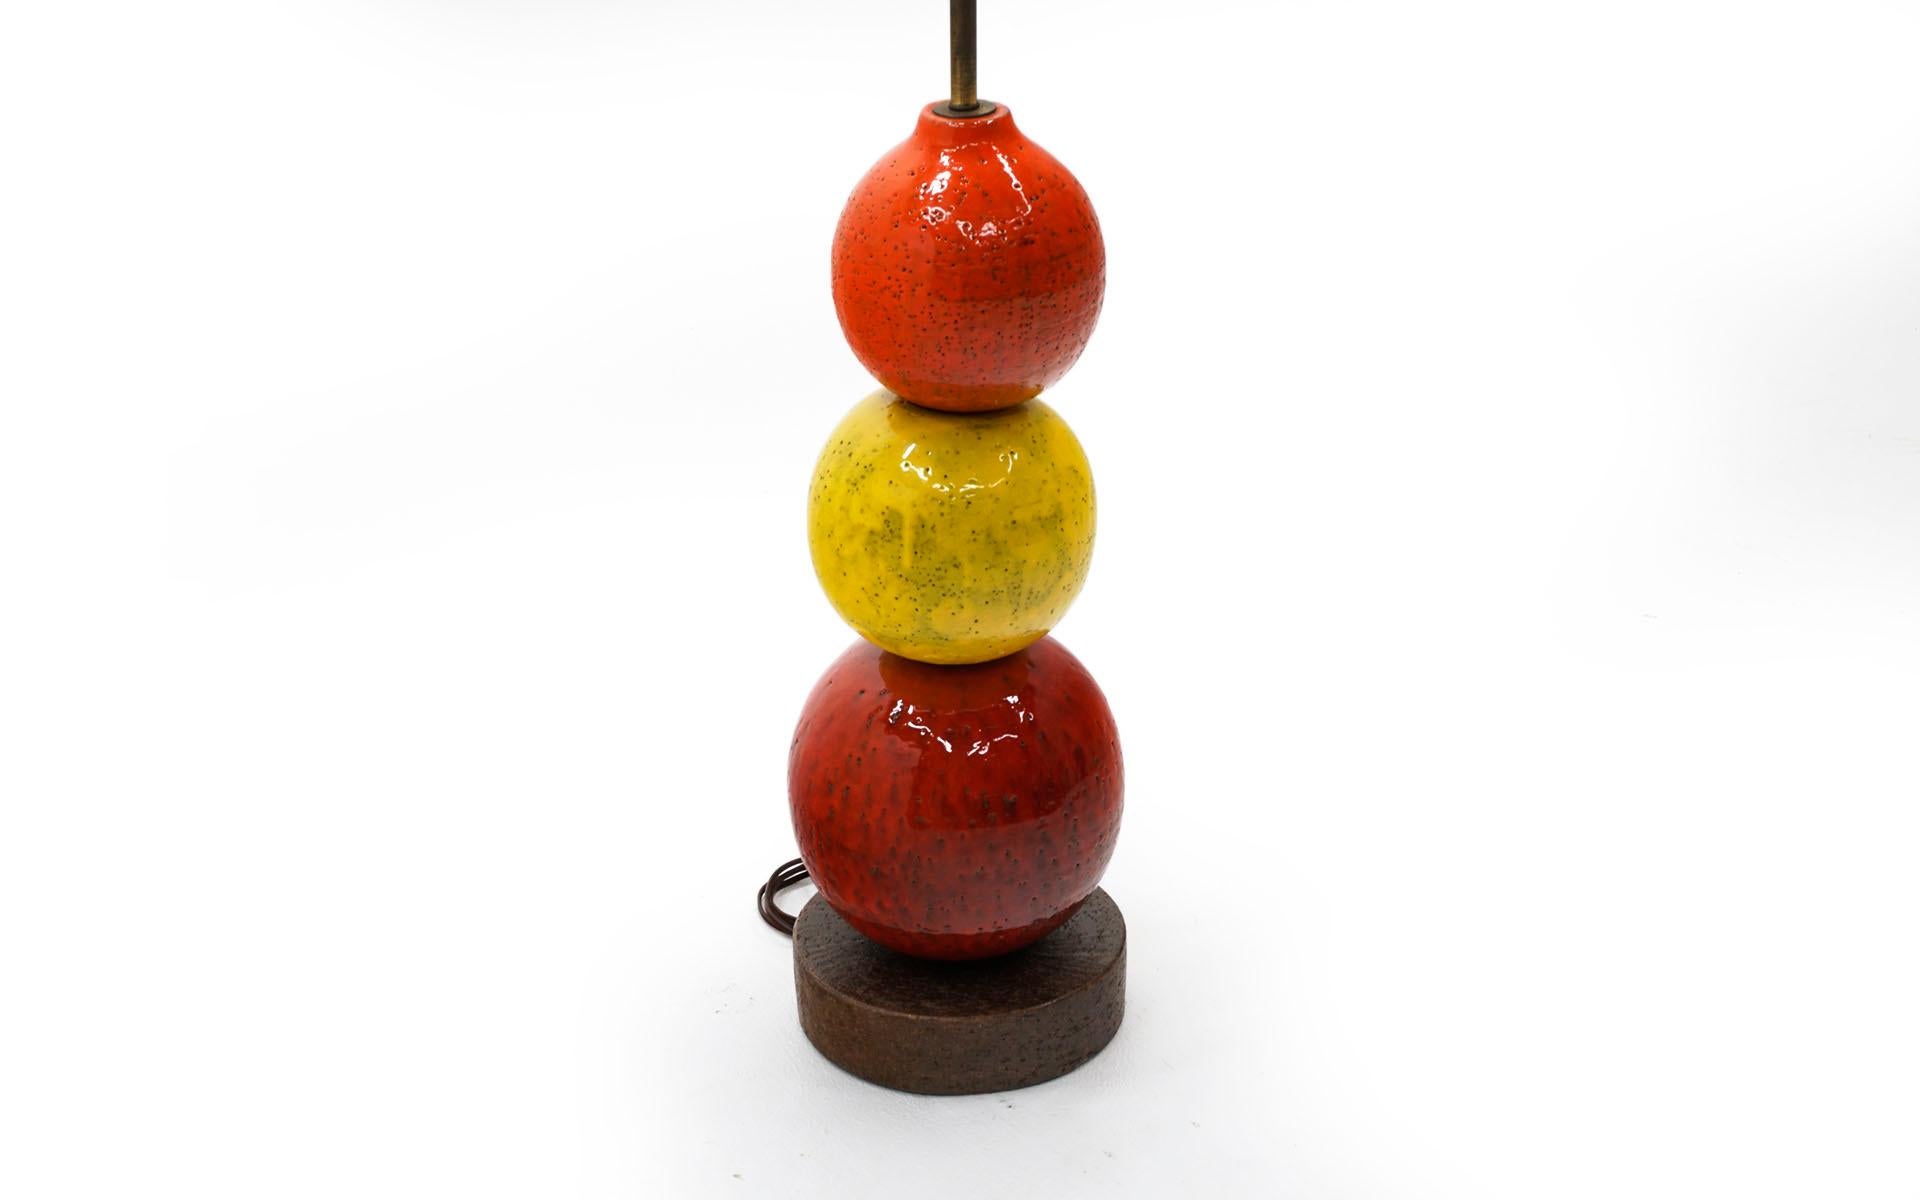 Pottery ball table lamp by Bitossi, Italy, 1960s in red, yellow and orange. Free of chips or scratches, this was acquired from the original owners. Retains its original finial. Lamp is sold without a shade.